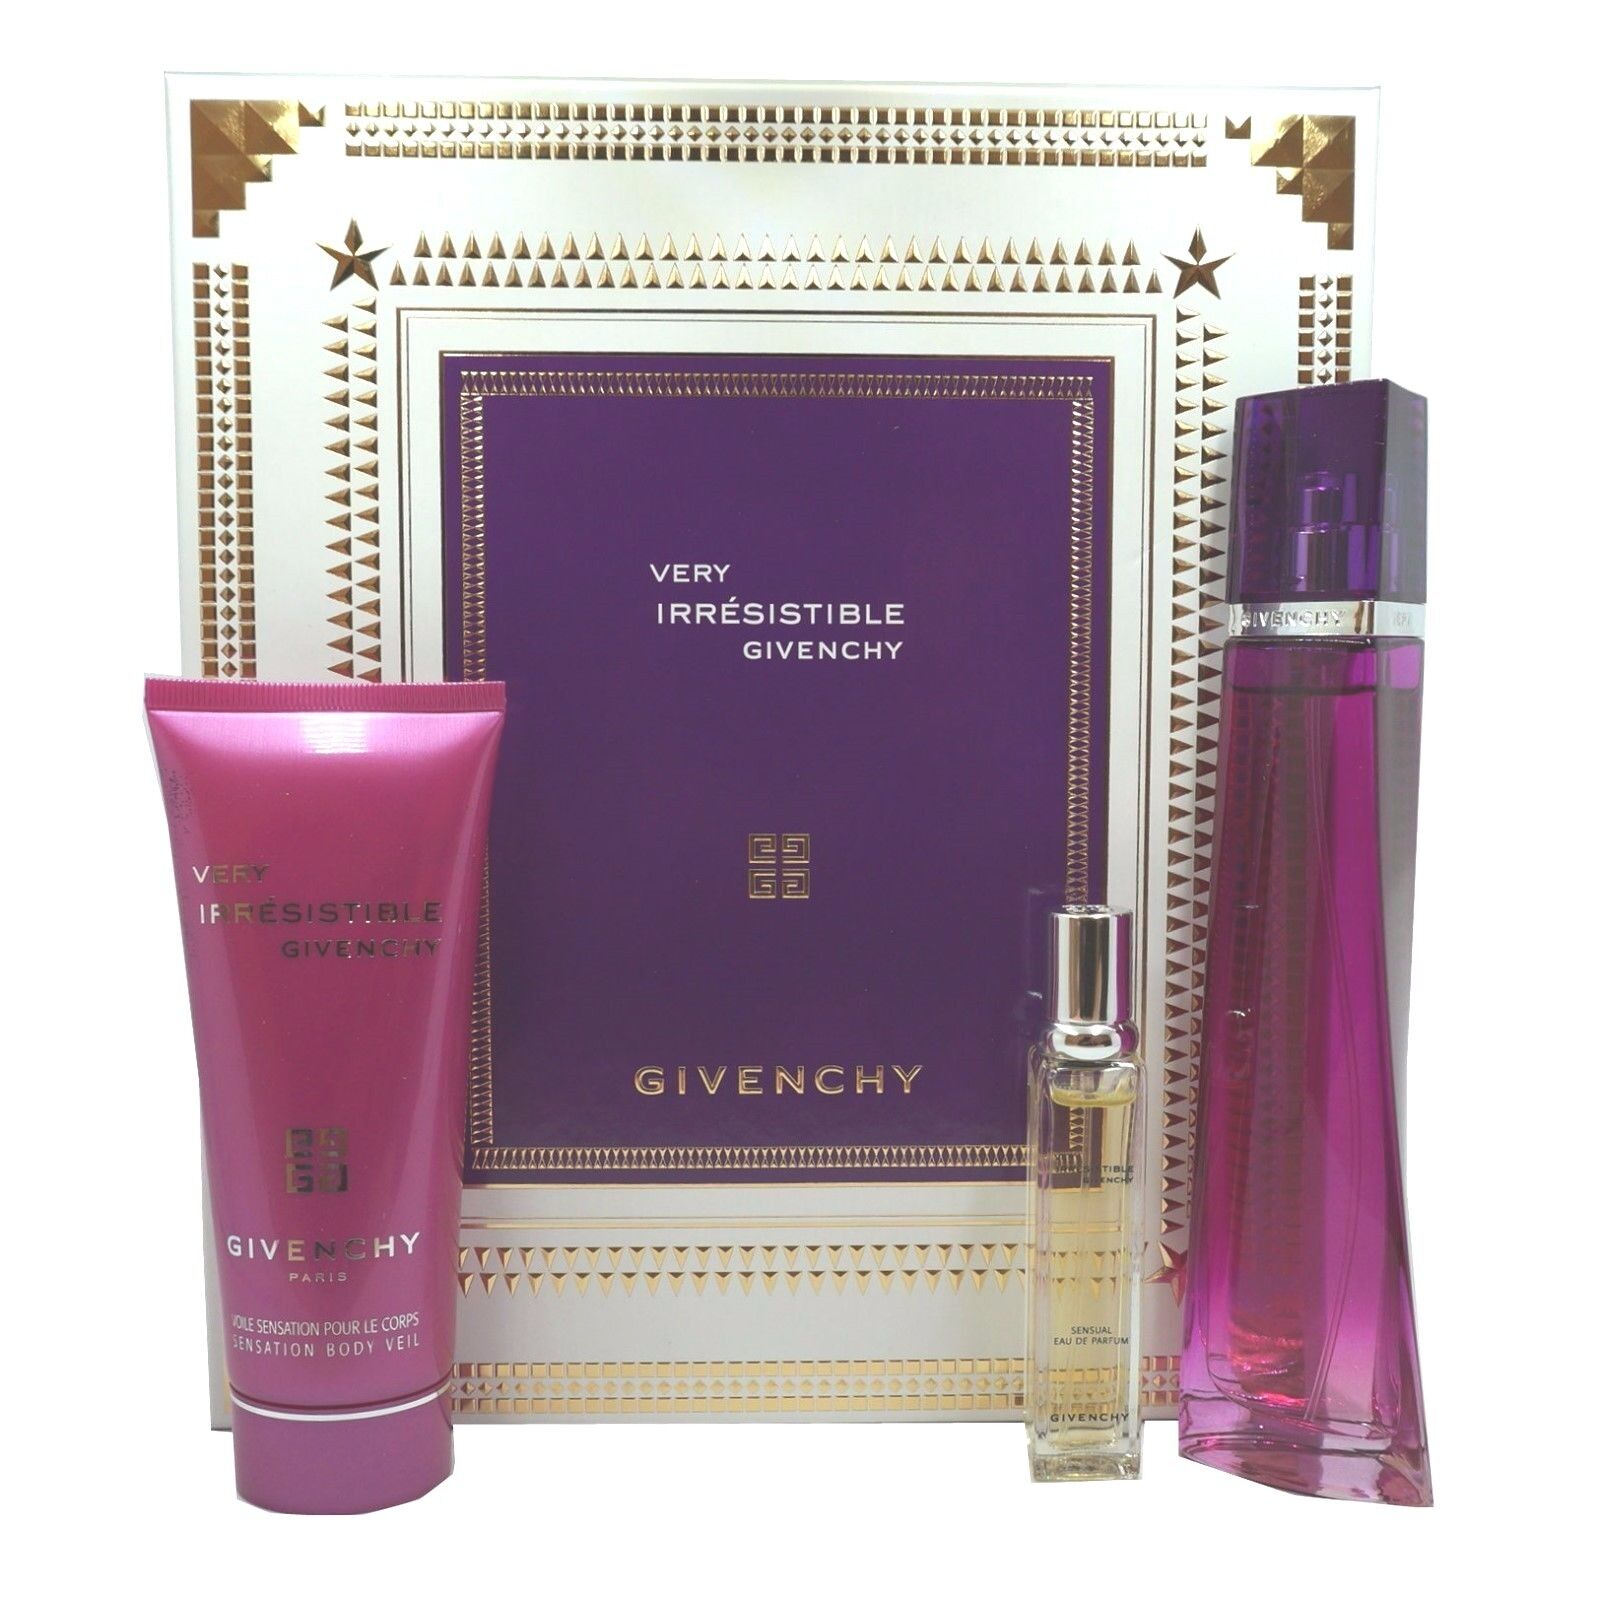 Givenchy Very Irresistible for Women Gift Set - Set of 3 for sale online |  eBay